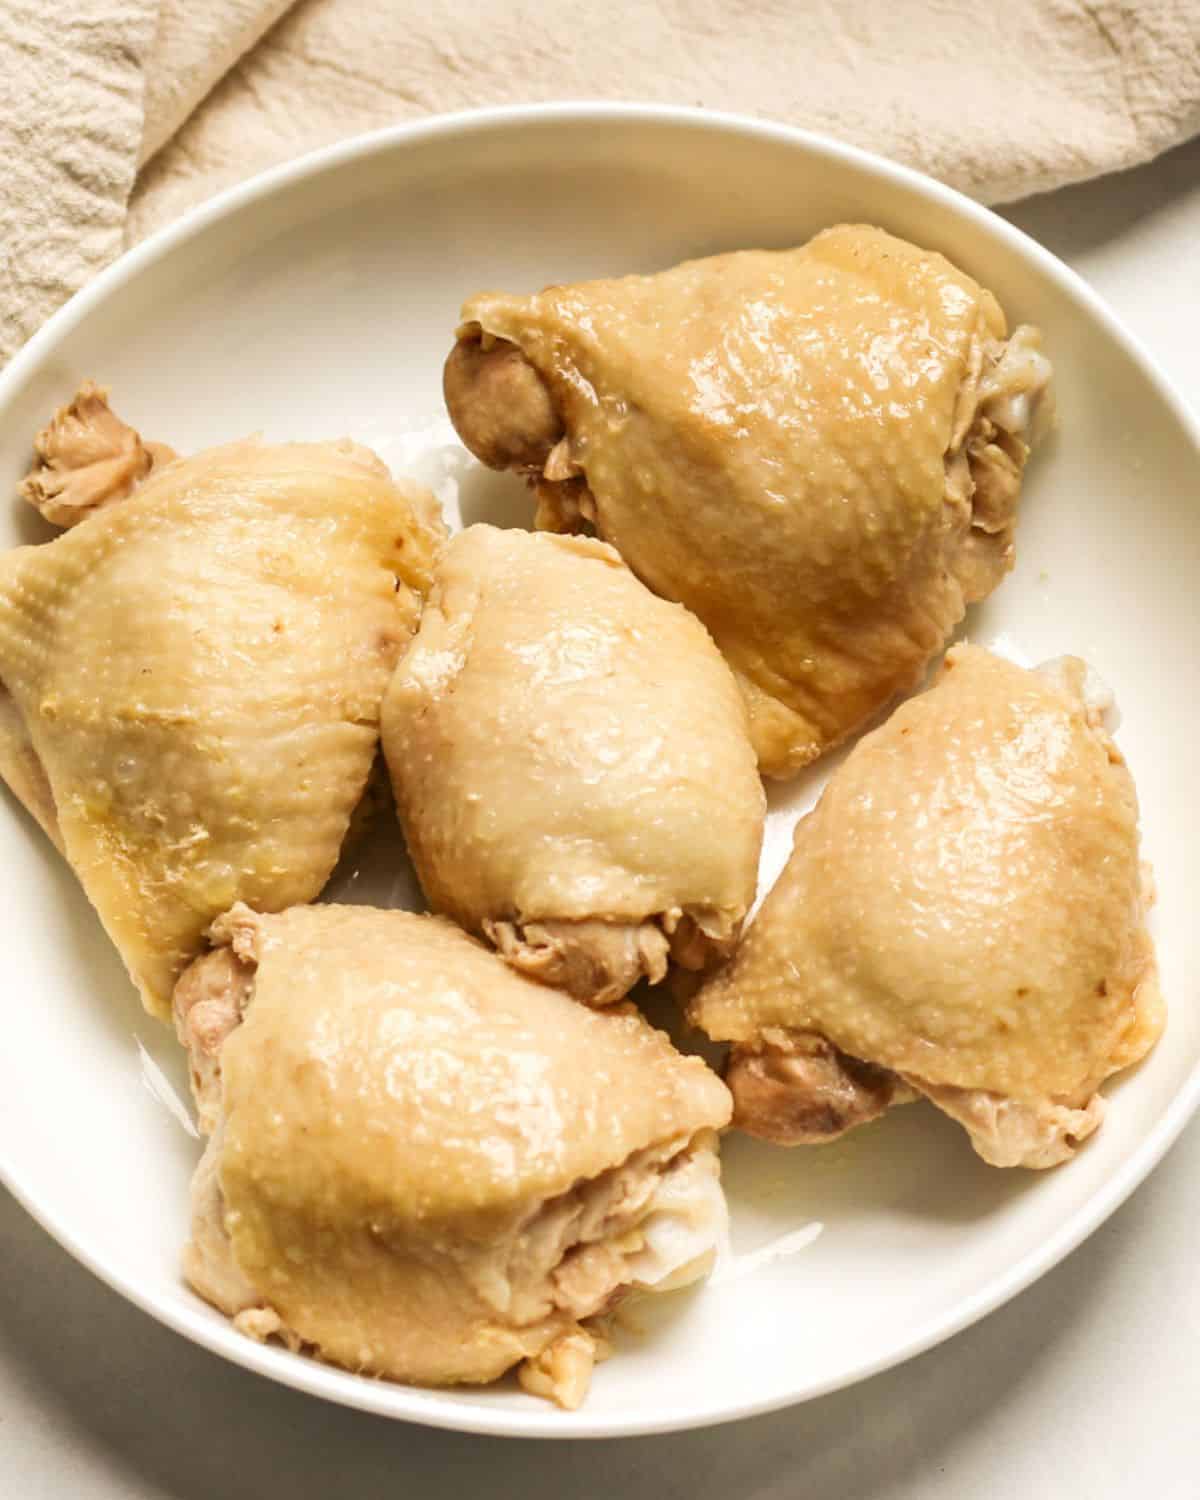 5 boiled skin-on chicken thighs on a white plate.